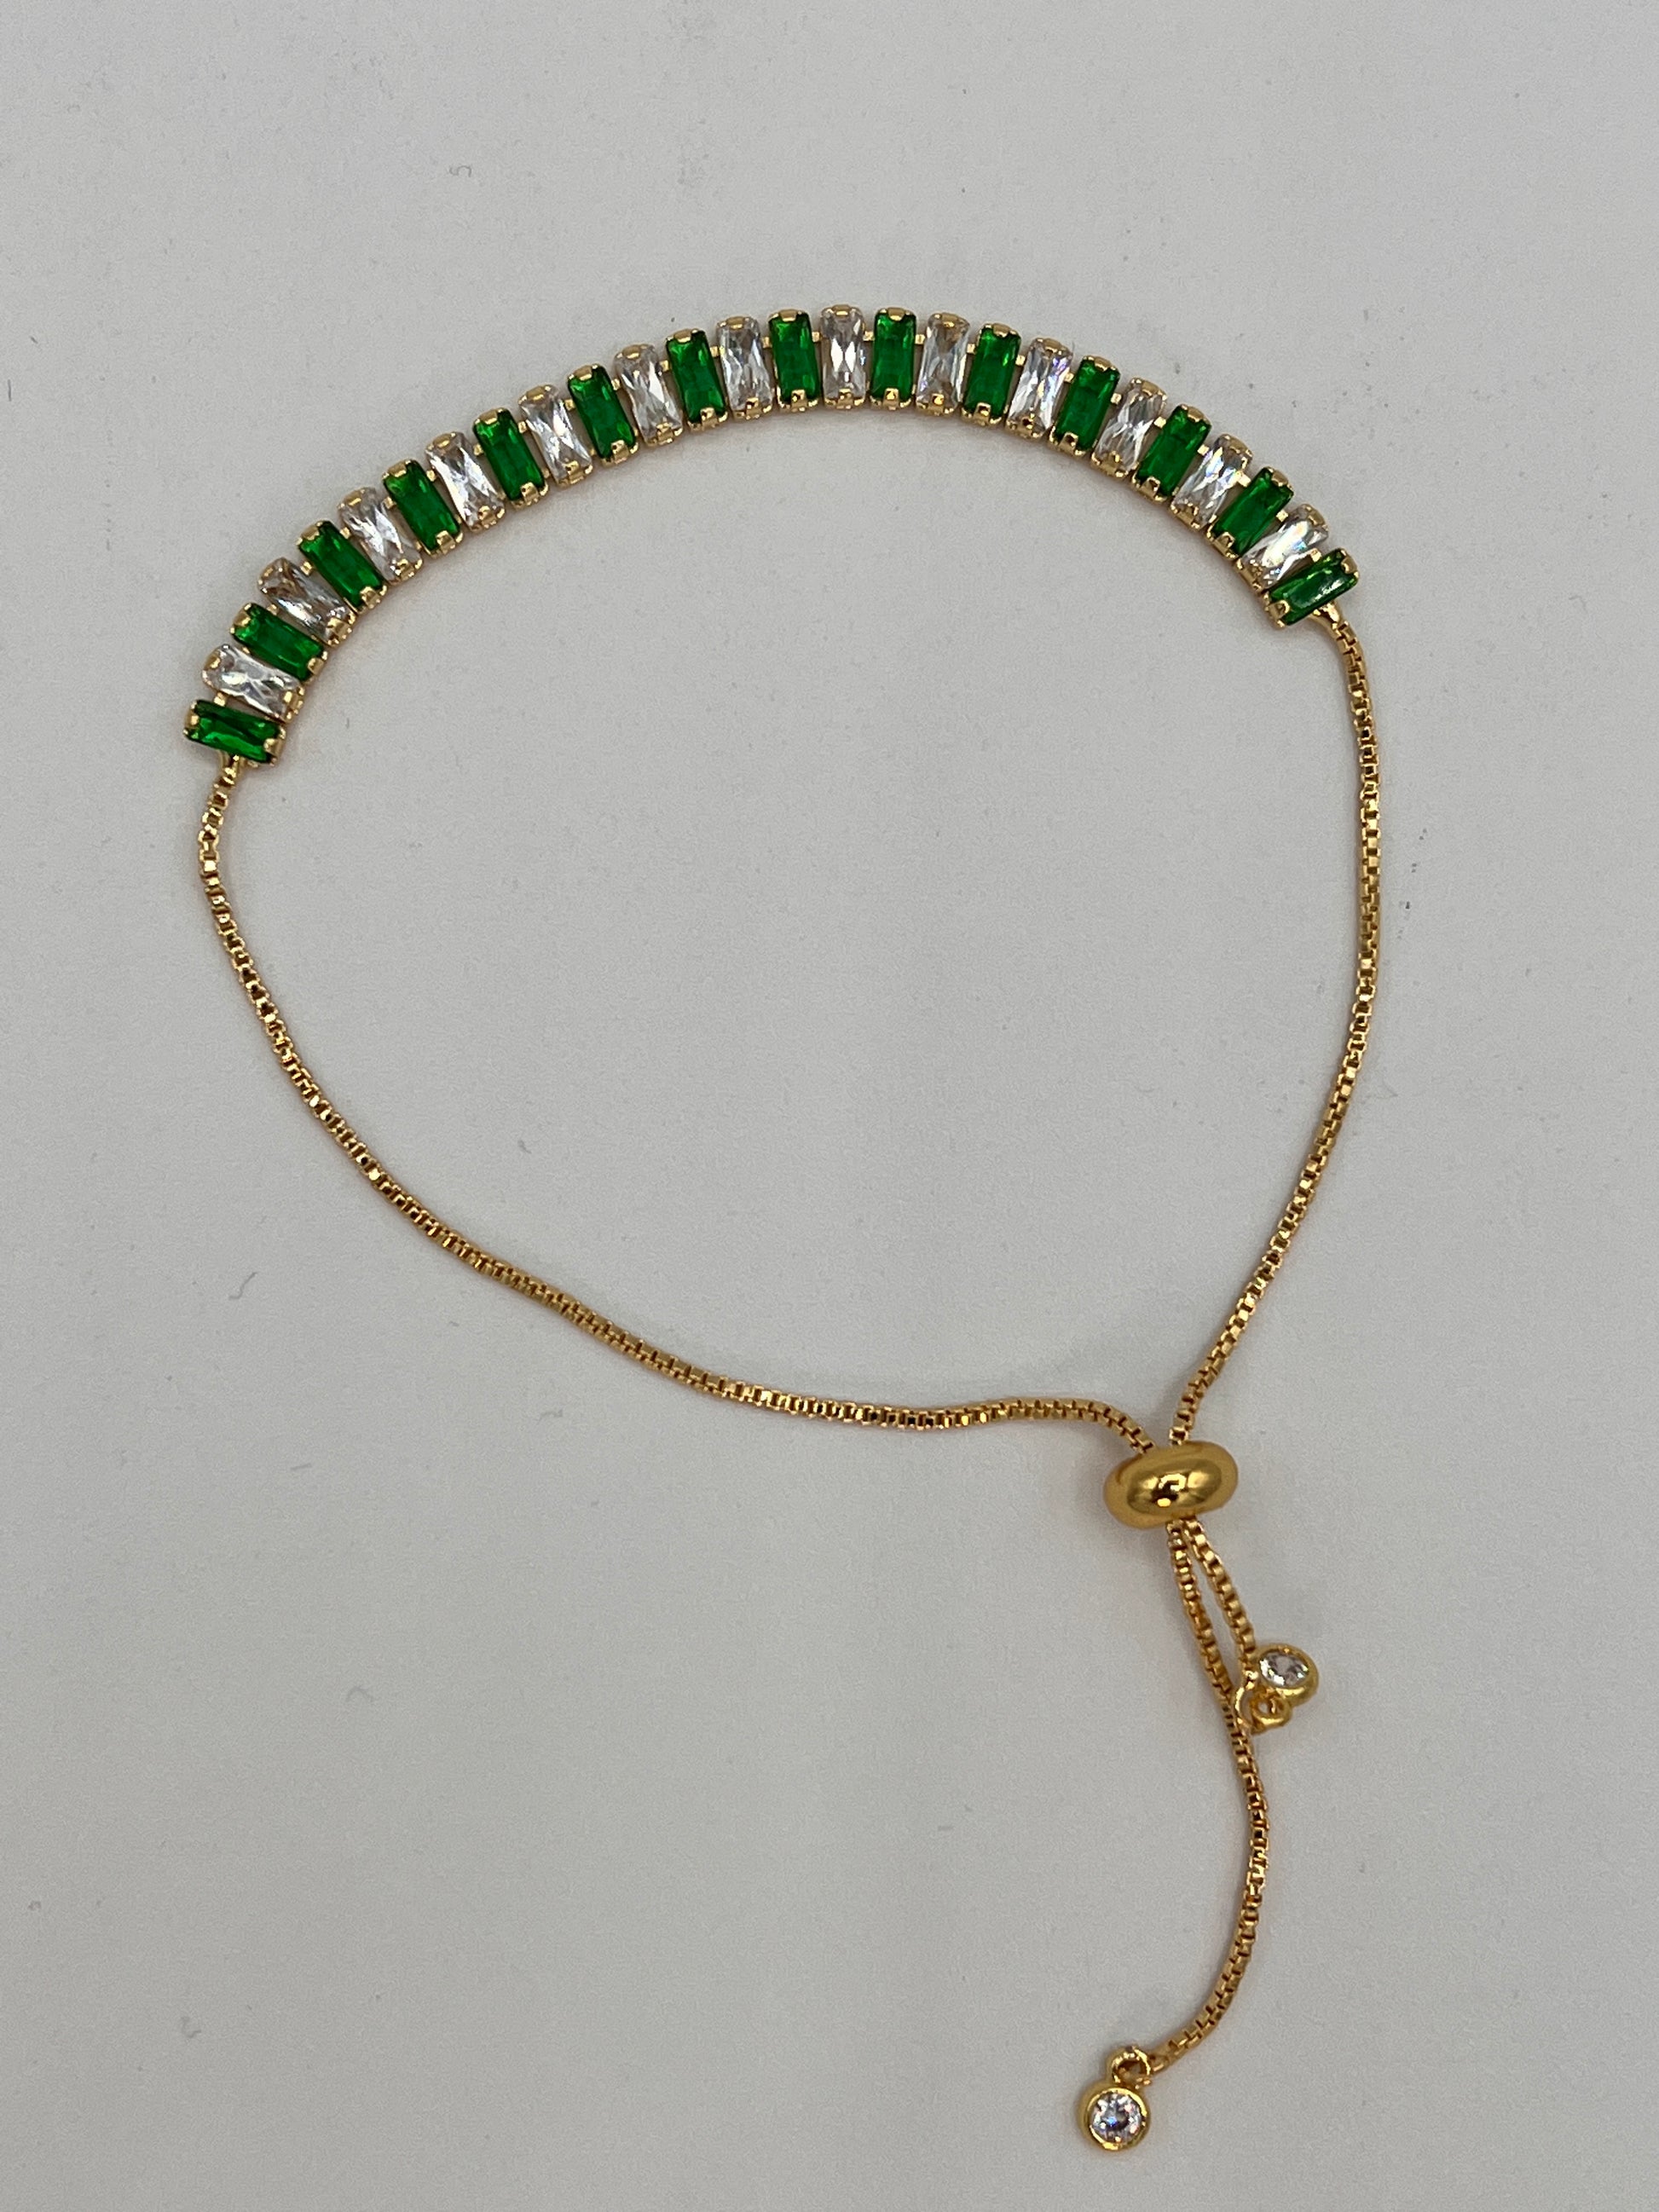 Adjustable Gold Bracelet, Emerald and White Zircon Jewelry, Eco-Friendly Brass, 18k Gold Plating, AAA Cubic Zircons, Timeless Radiance, Personalized Style, Opulent Accessories, Sustainable Luxury